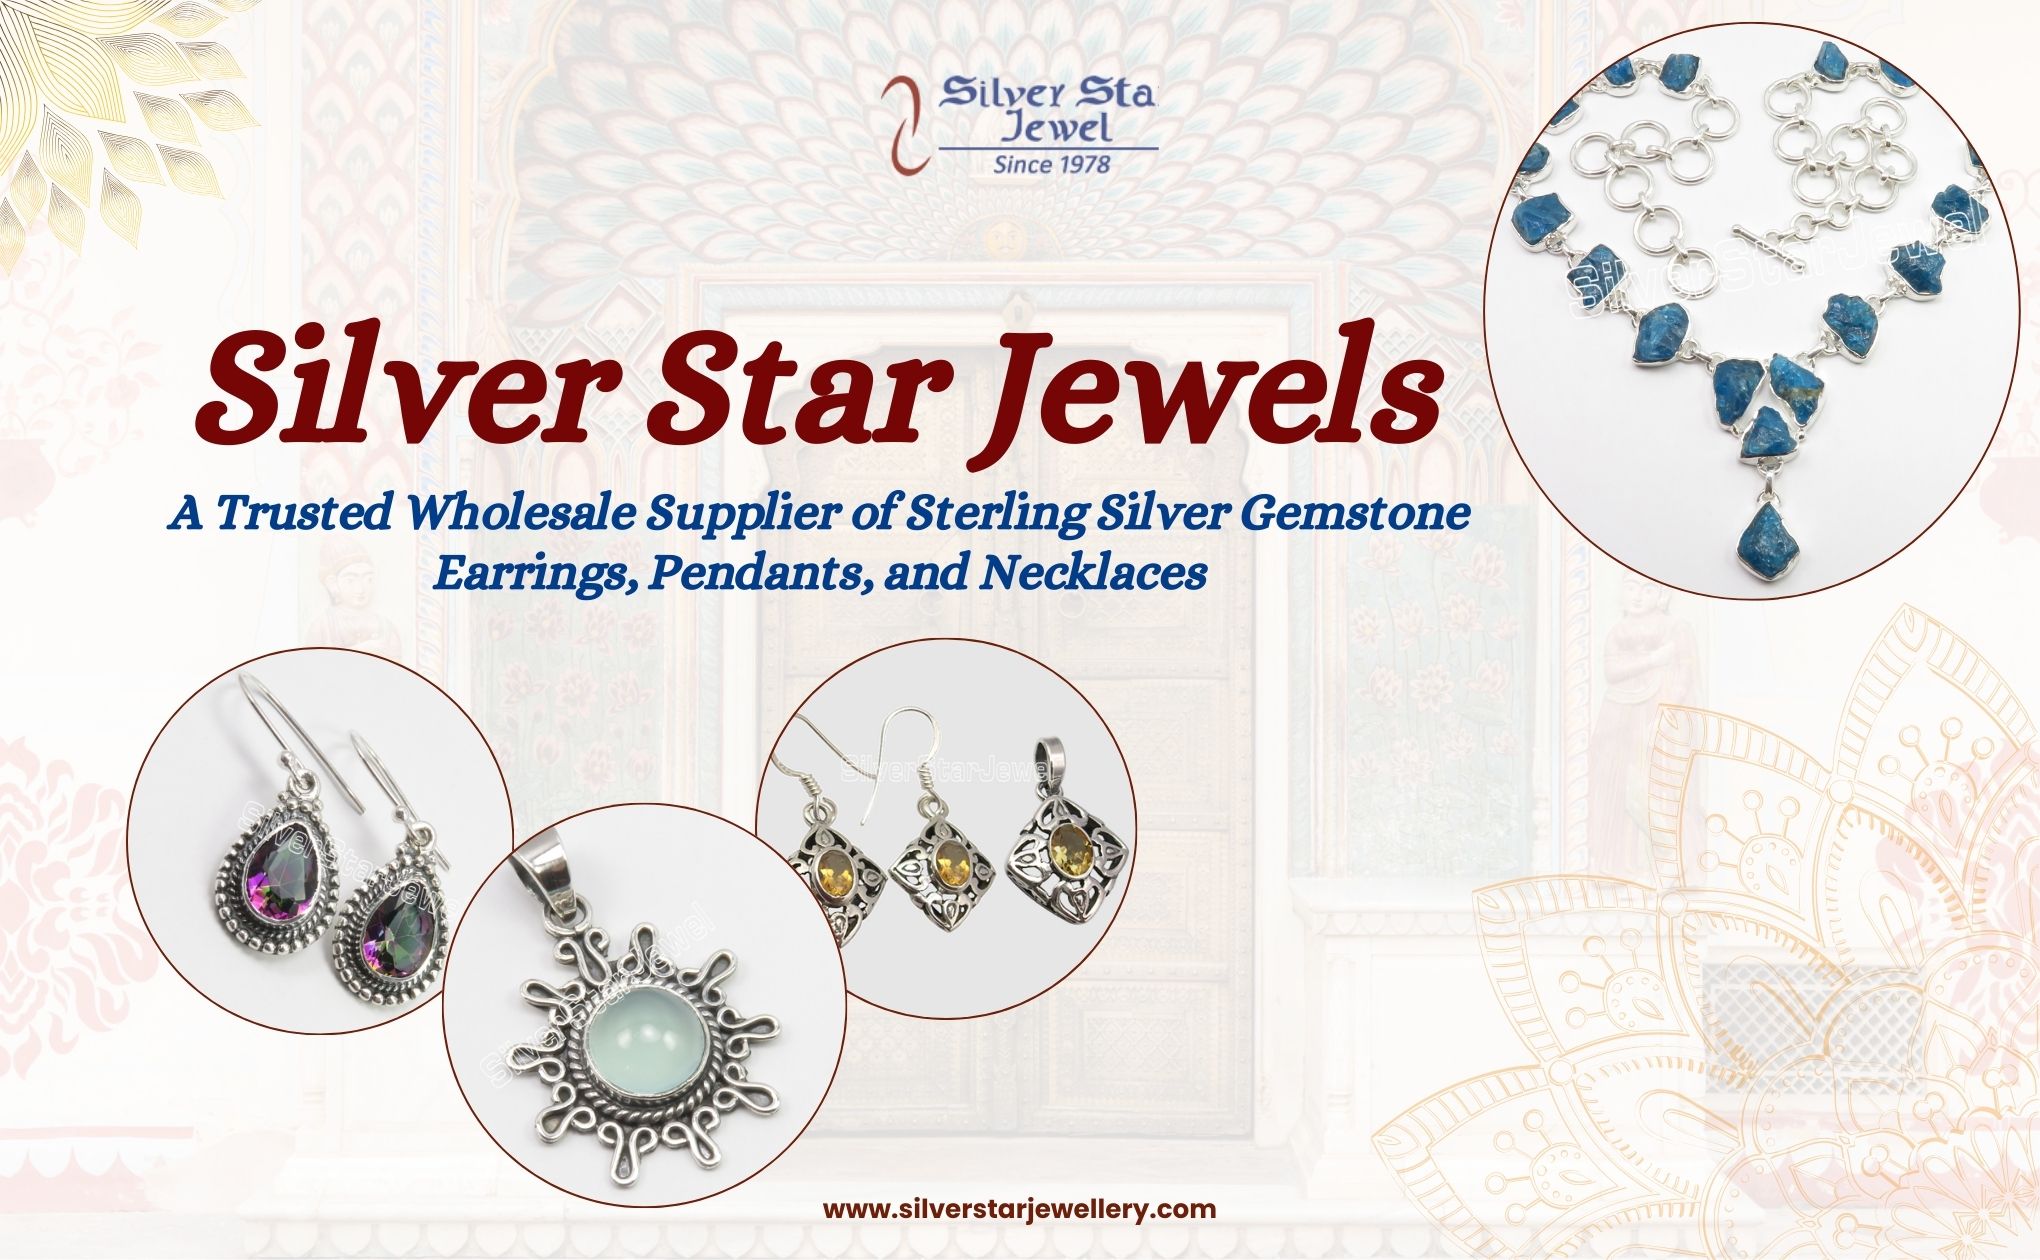 Silver Star Jewels: A Trusted Wholesale Supplier of Sterling Silver Gemstone Earrings, Pendants, and Necklaces